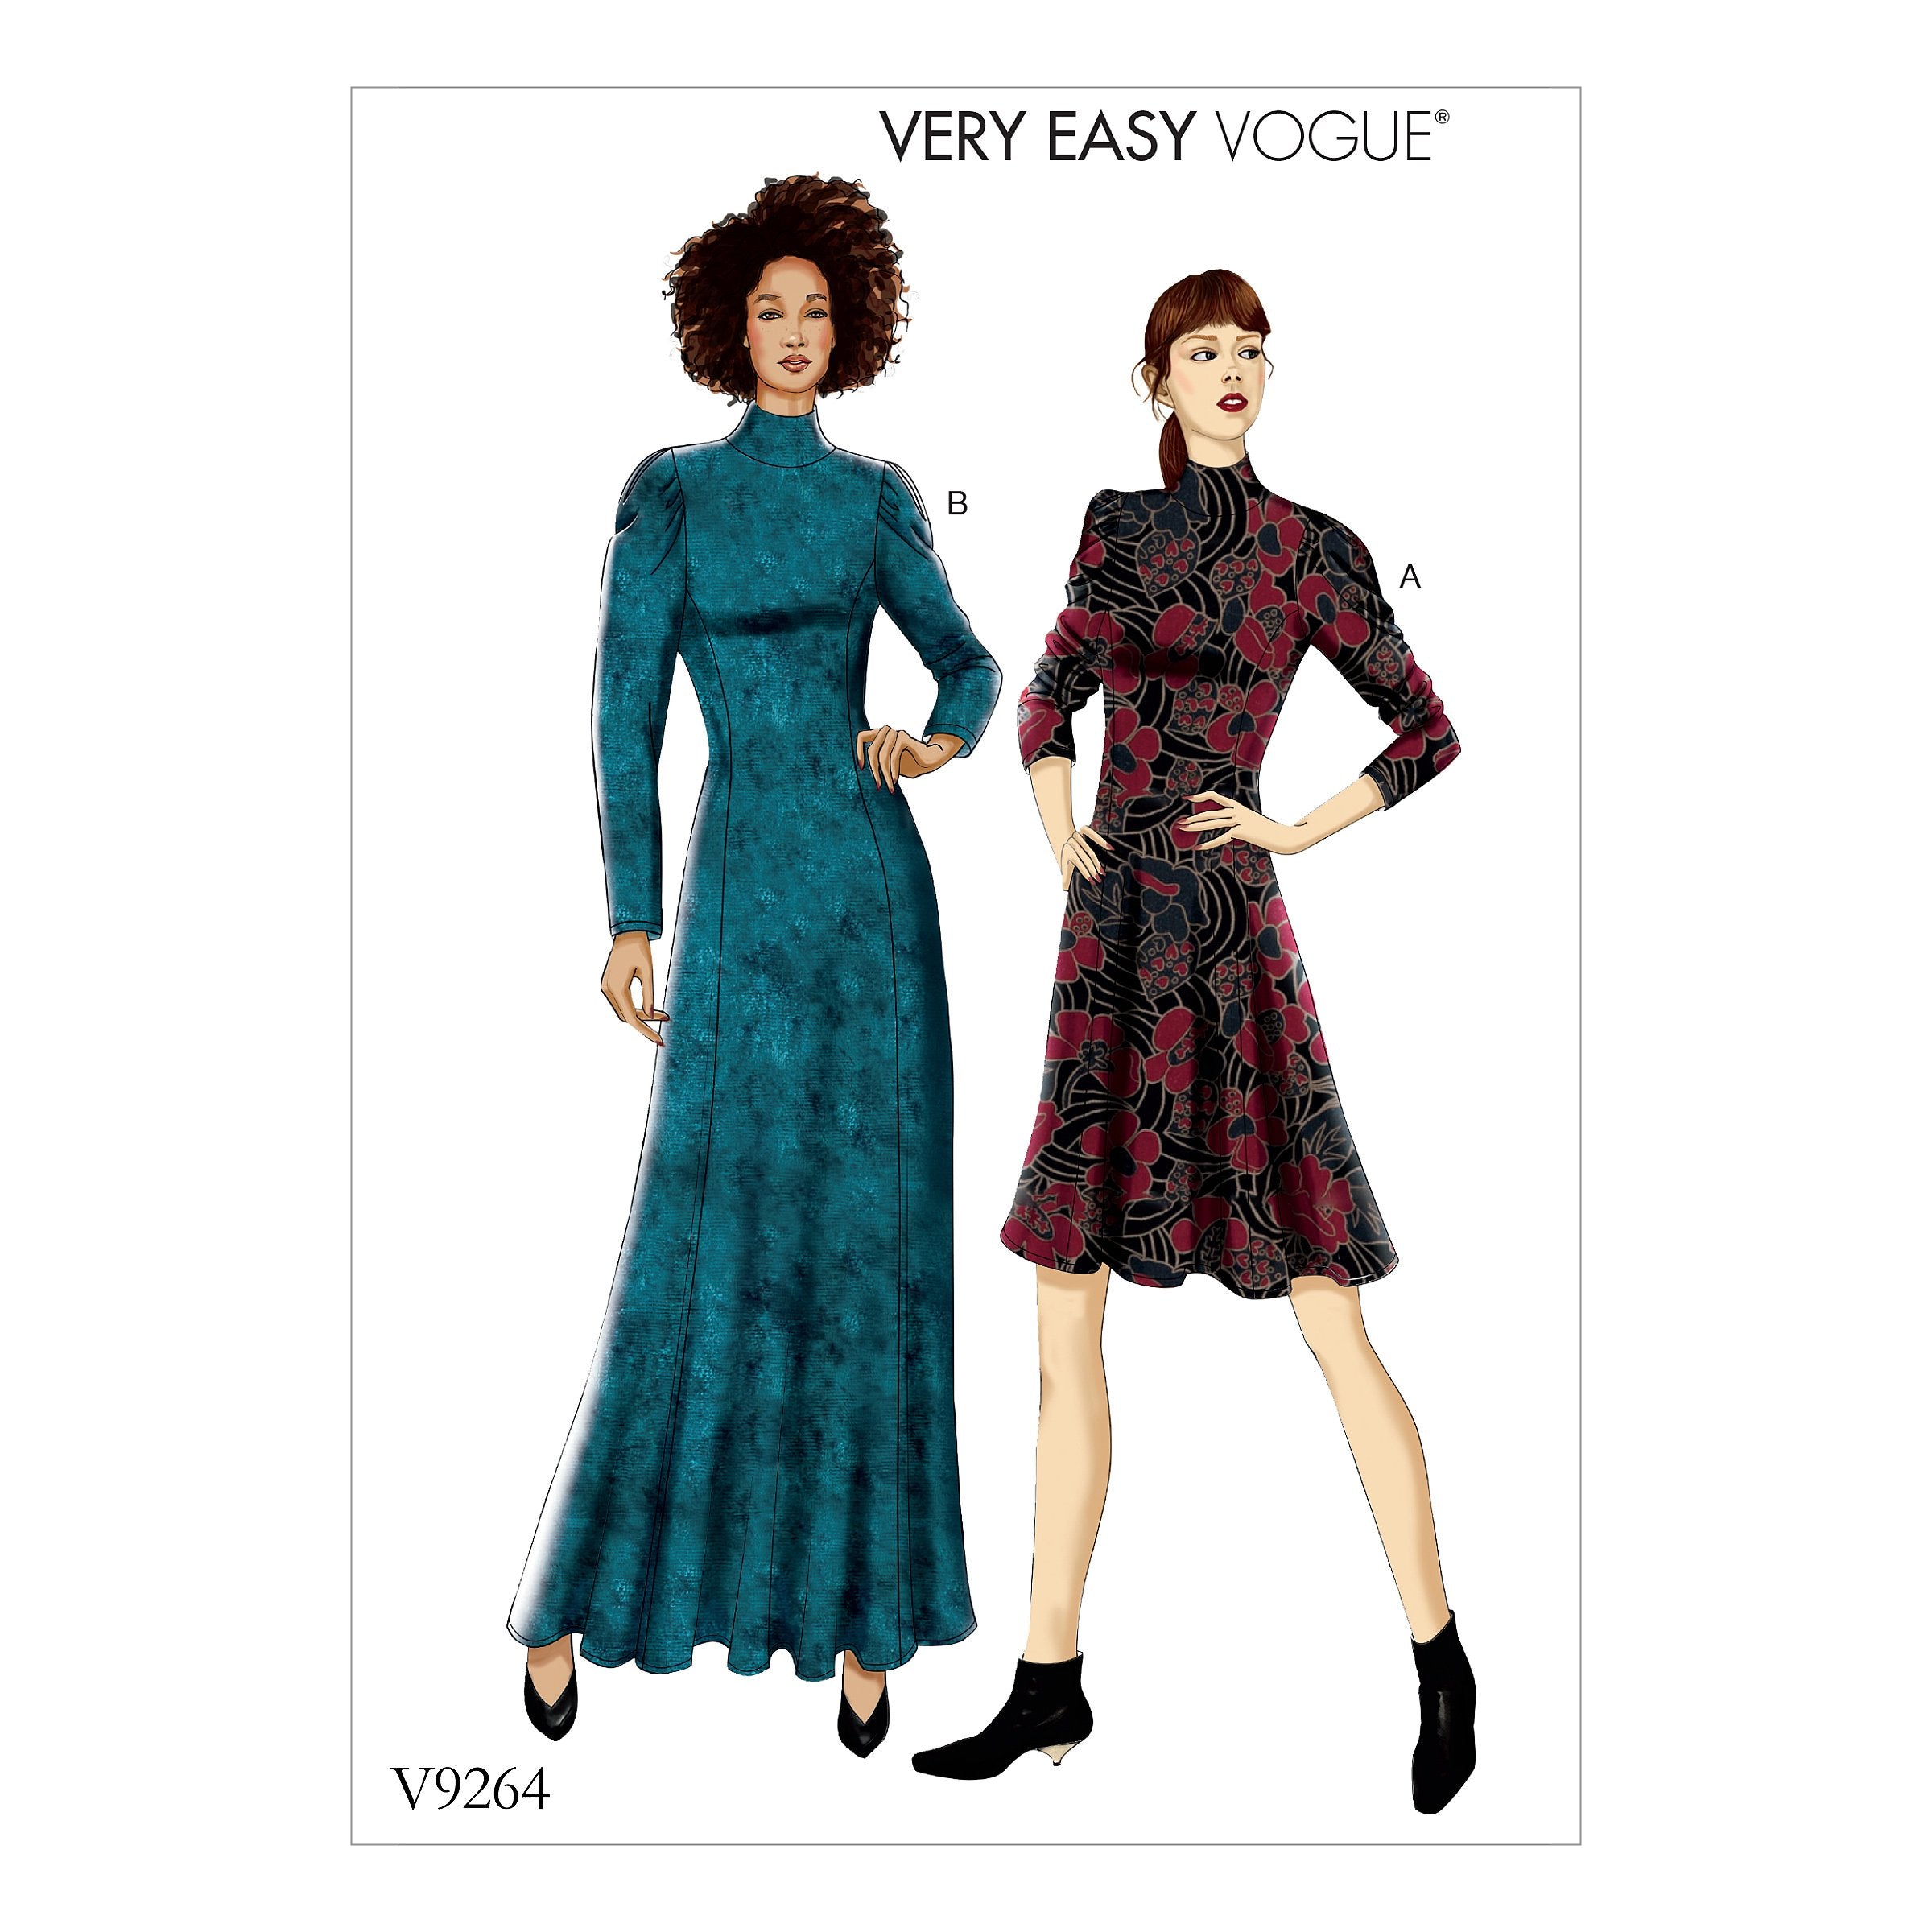 Vogue Pattern 9264 Misses'/Misses' Petite Knit, Fit-And-Flare Dresses from Jaycotts Sewing Supplies